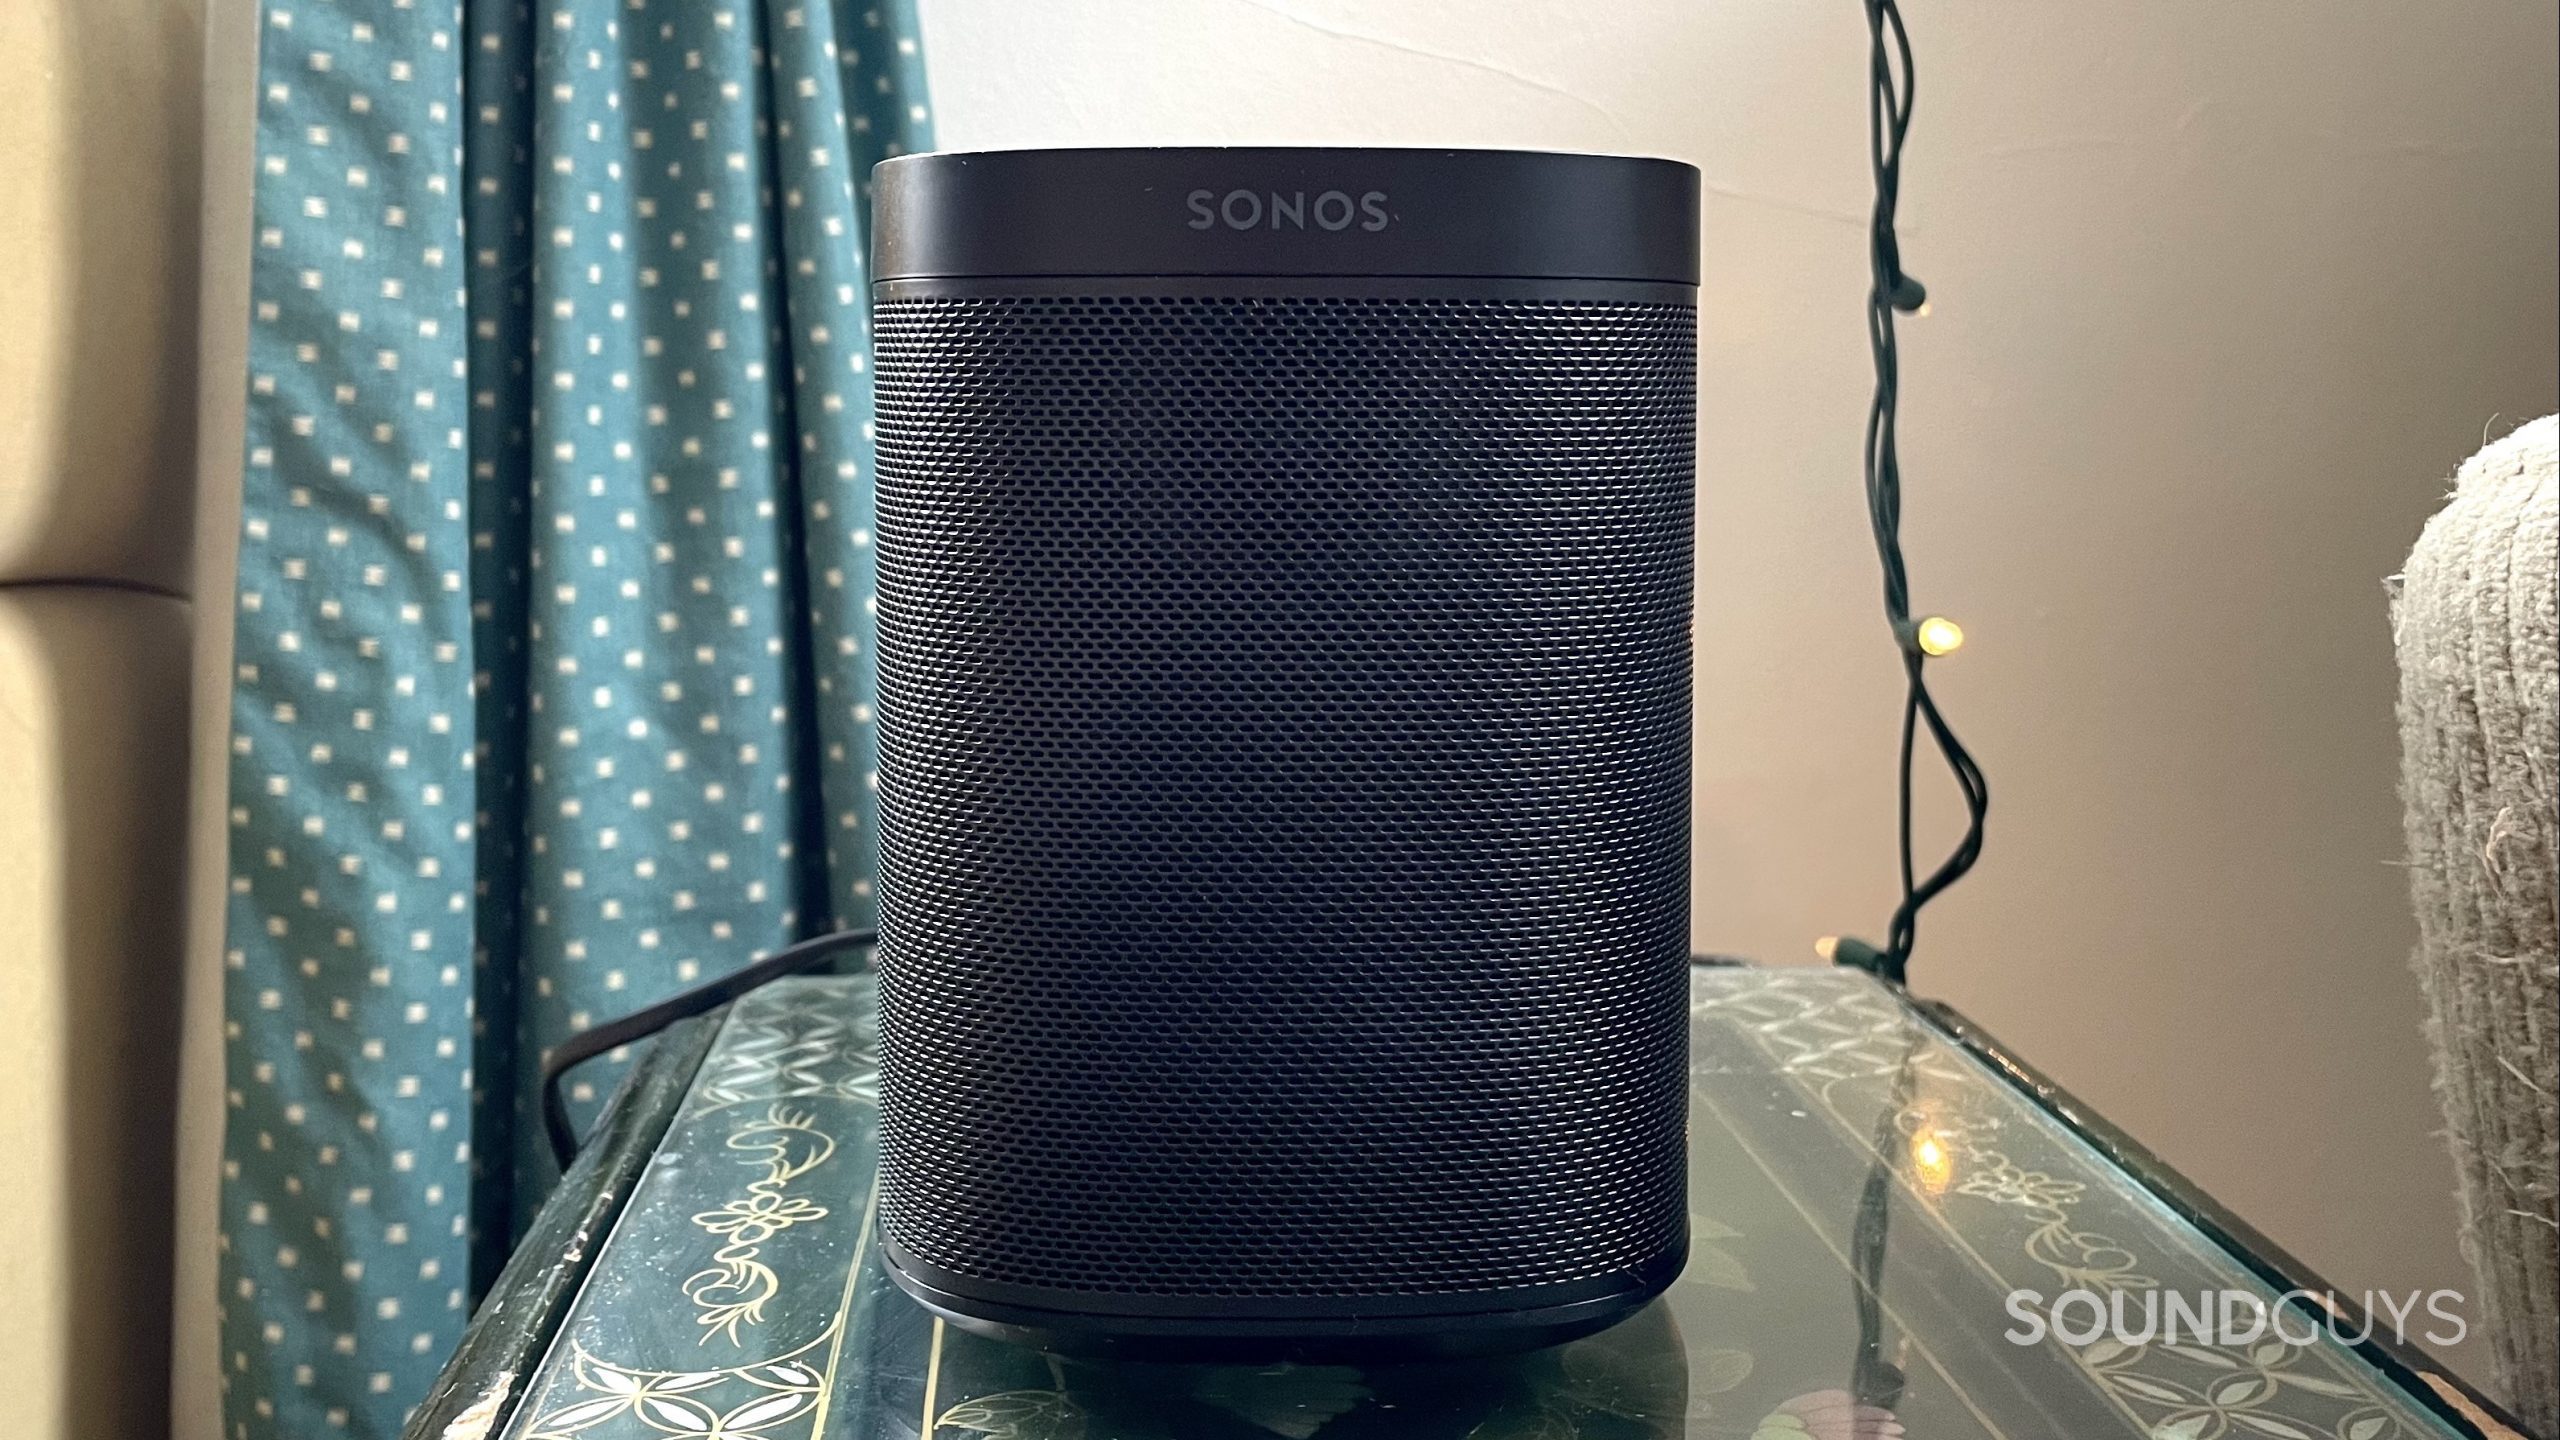 Sonos One review: still a great smart speaker - Reviewed